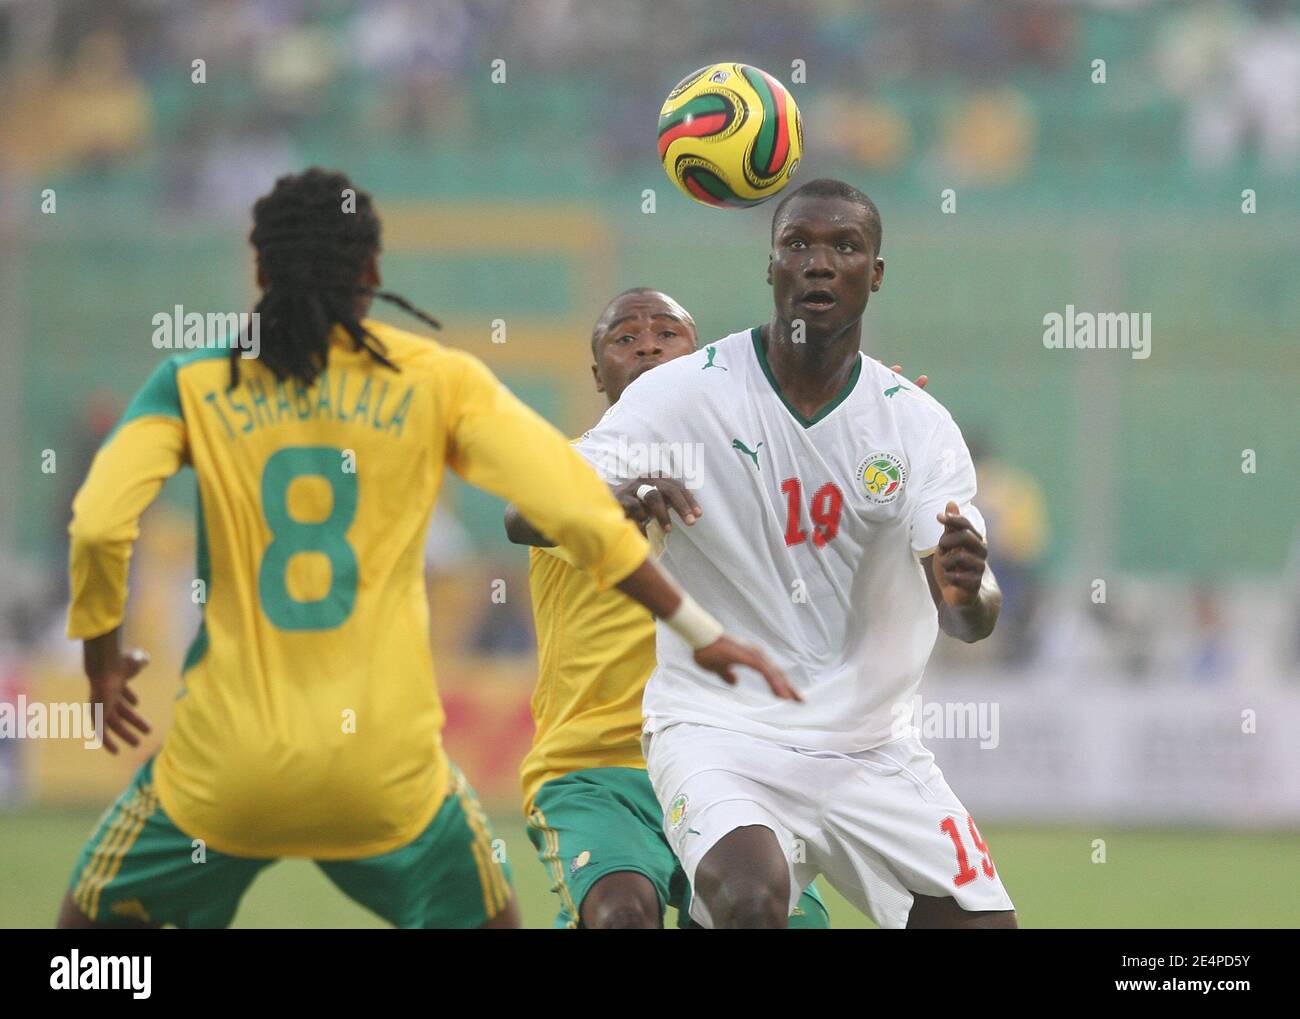 Senegal's Bouba Diop Pape during the African Cup of Nations soccer match, Senegal vs South Africa in Kumasi, Ghana on January 31, 2008. The match ended in a 1-1 draw. Senegal failed to qualify for the next round of the competition. Photo by Steeve McMay/Cameleon/ABACAPRESS.COM Stock Photo